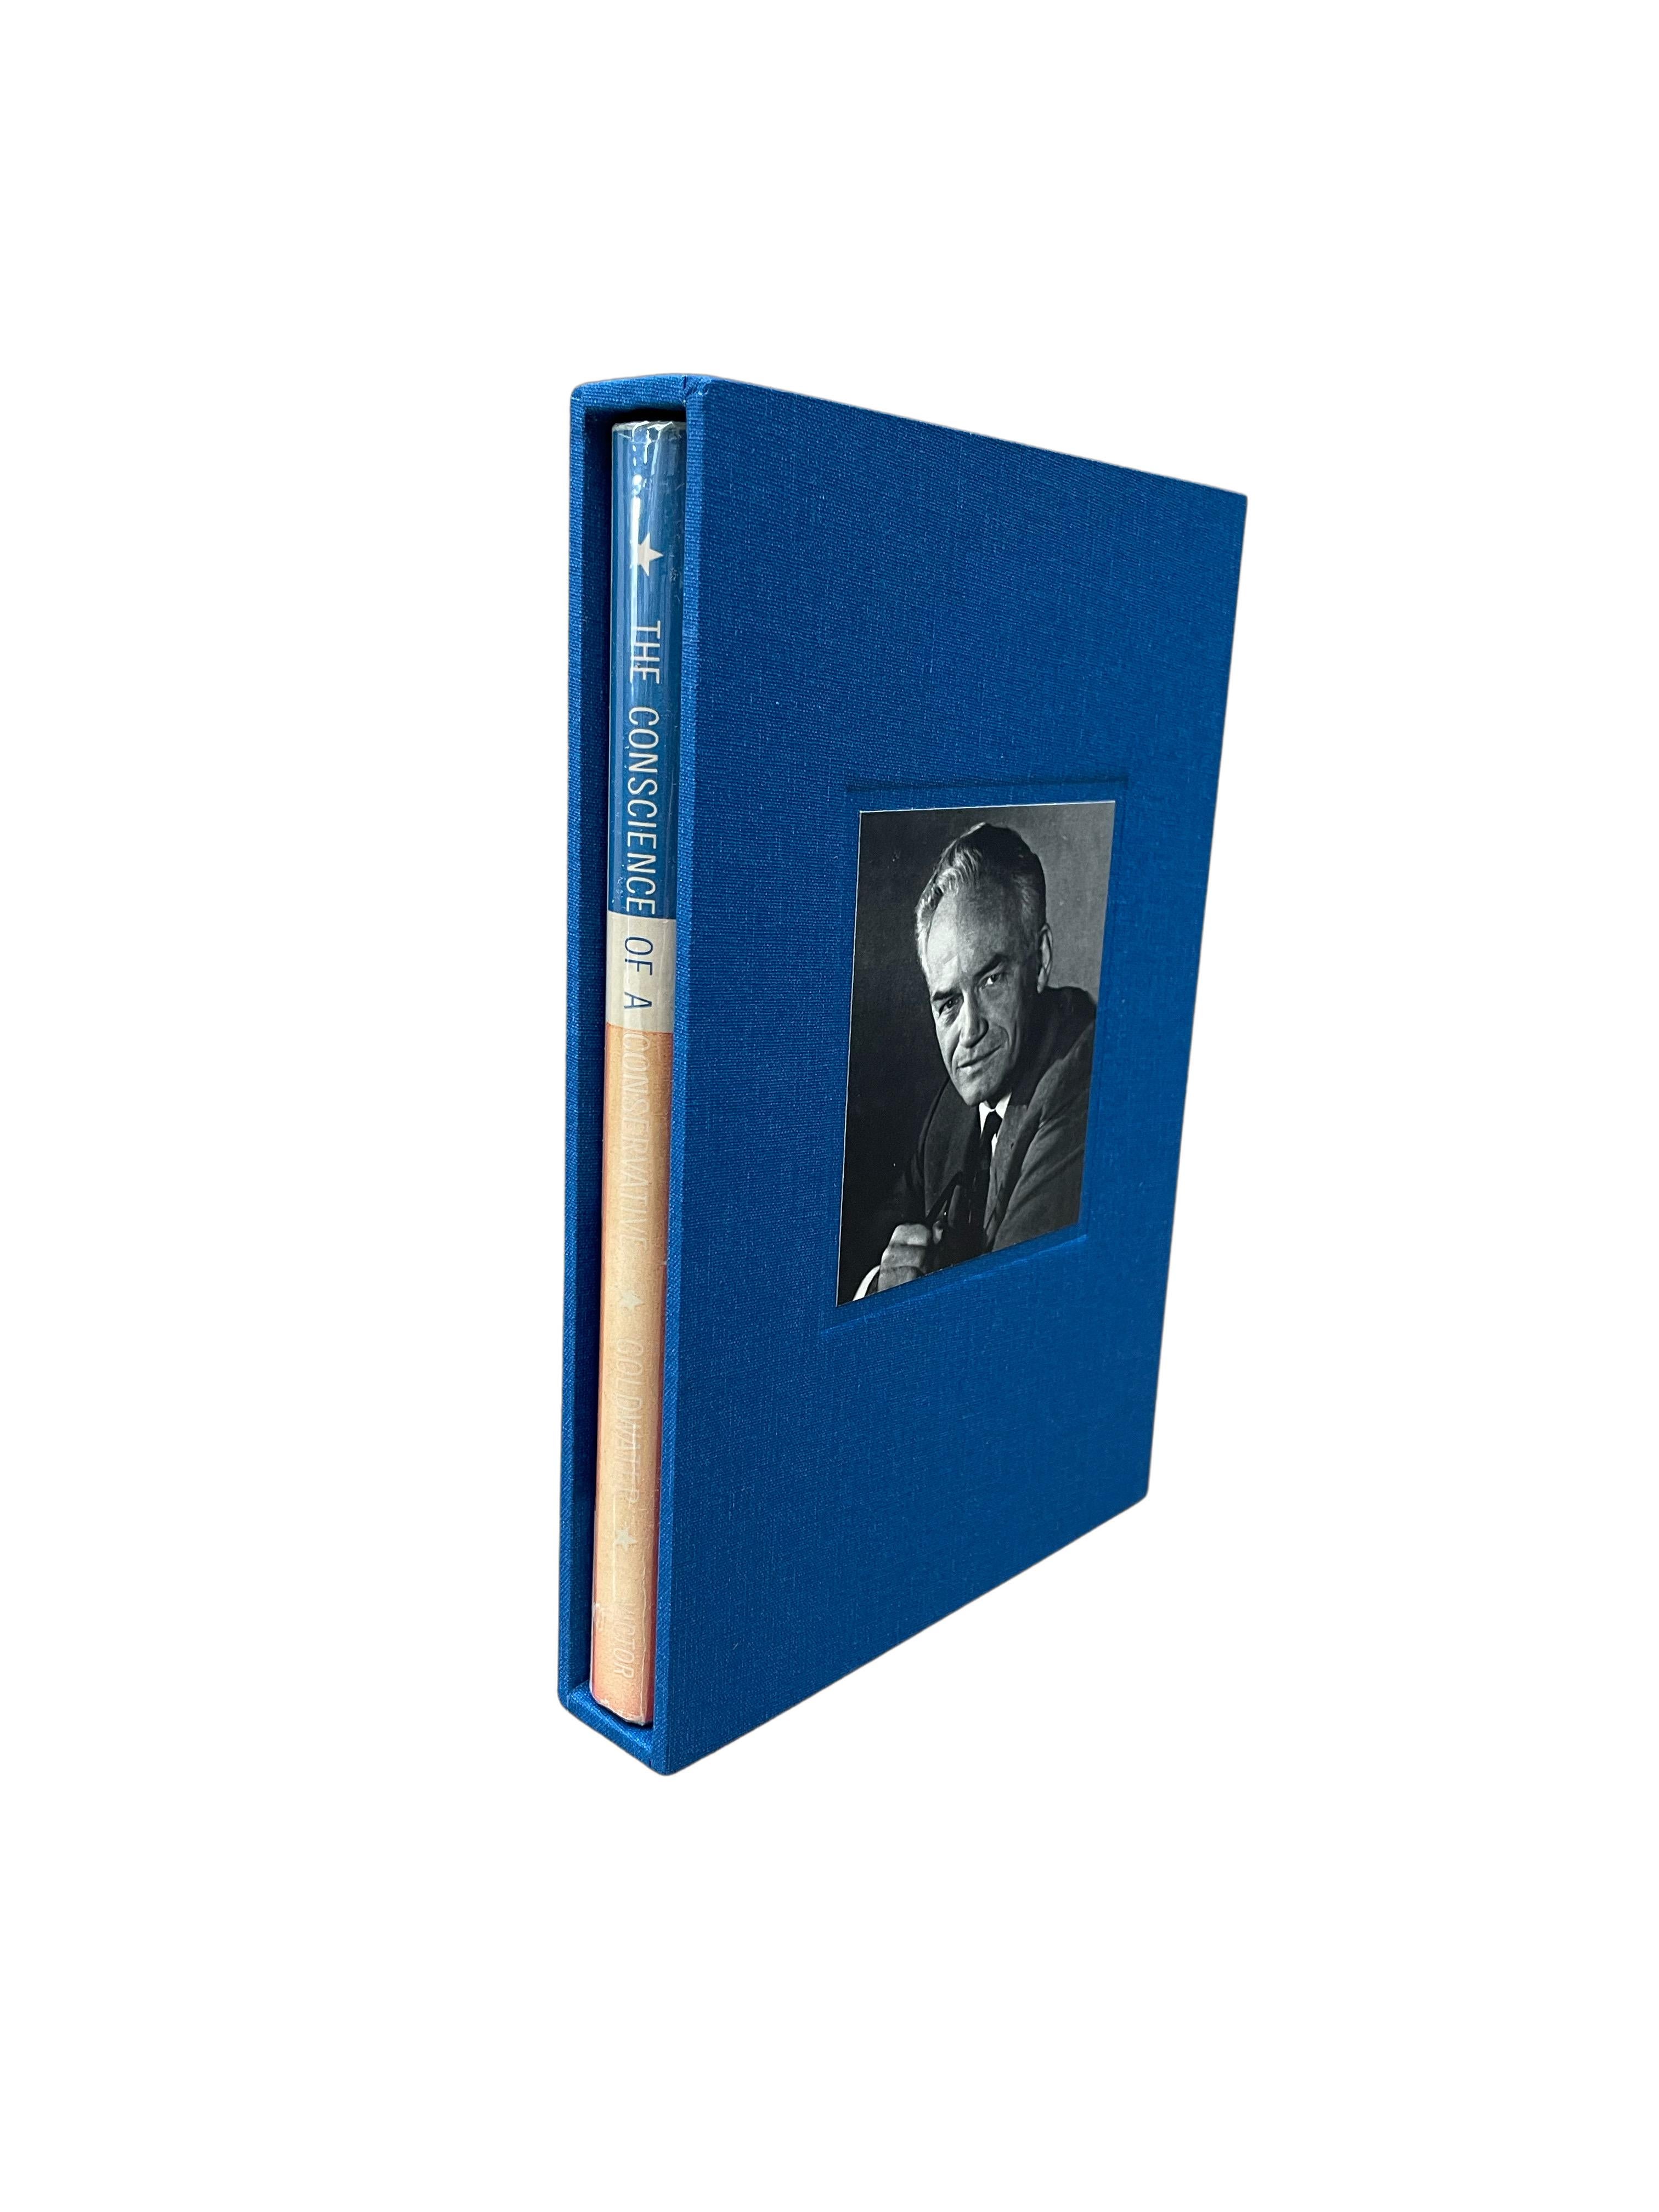 Goldwater, Barry. The Conscience of a Conservative. Shepherdsville: Victor Publishing Co.,1960. Stated second printing. Octavo. In publisher’s original blue hardcover boards and original dust jacket. With new archival cloth slipcase. 

Presented